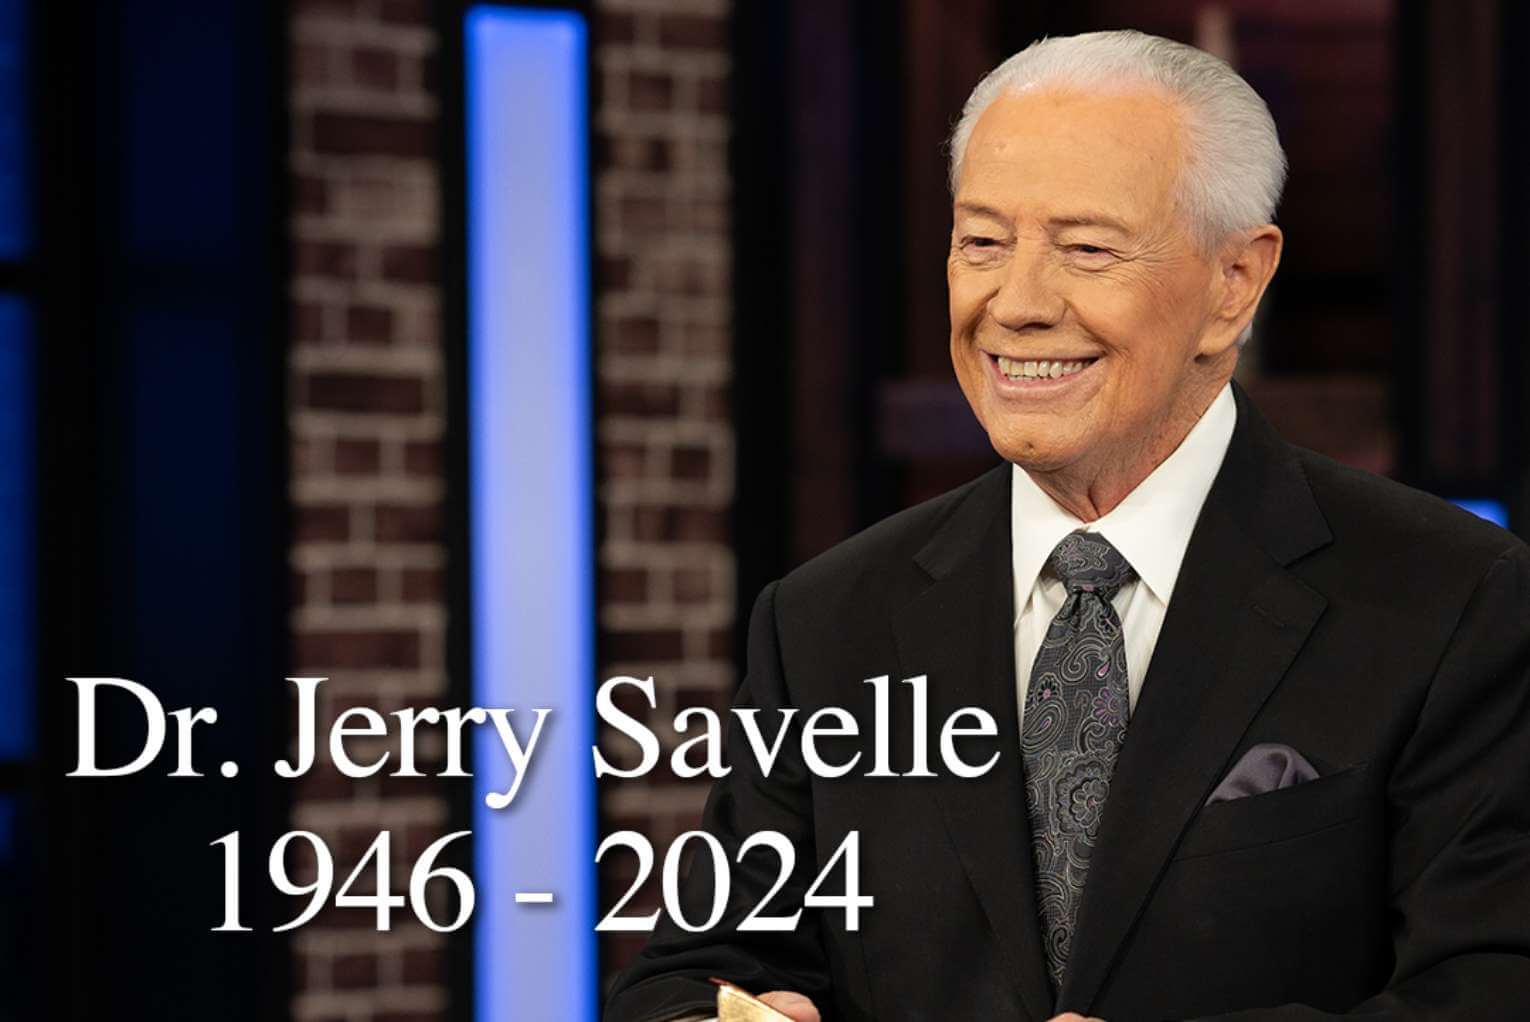 ‘A True General of the Lord’: Evangelist Jerry Savelle Dies at 77